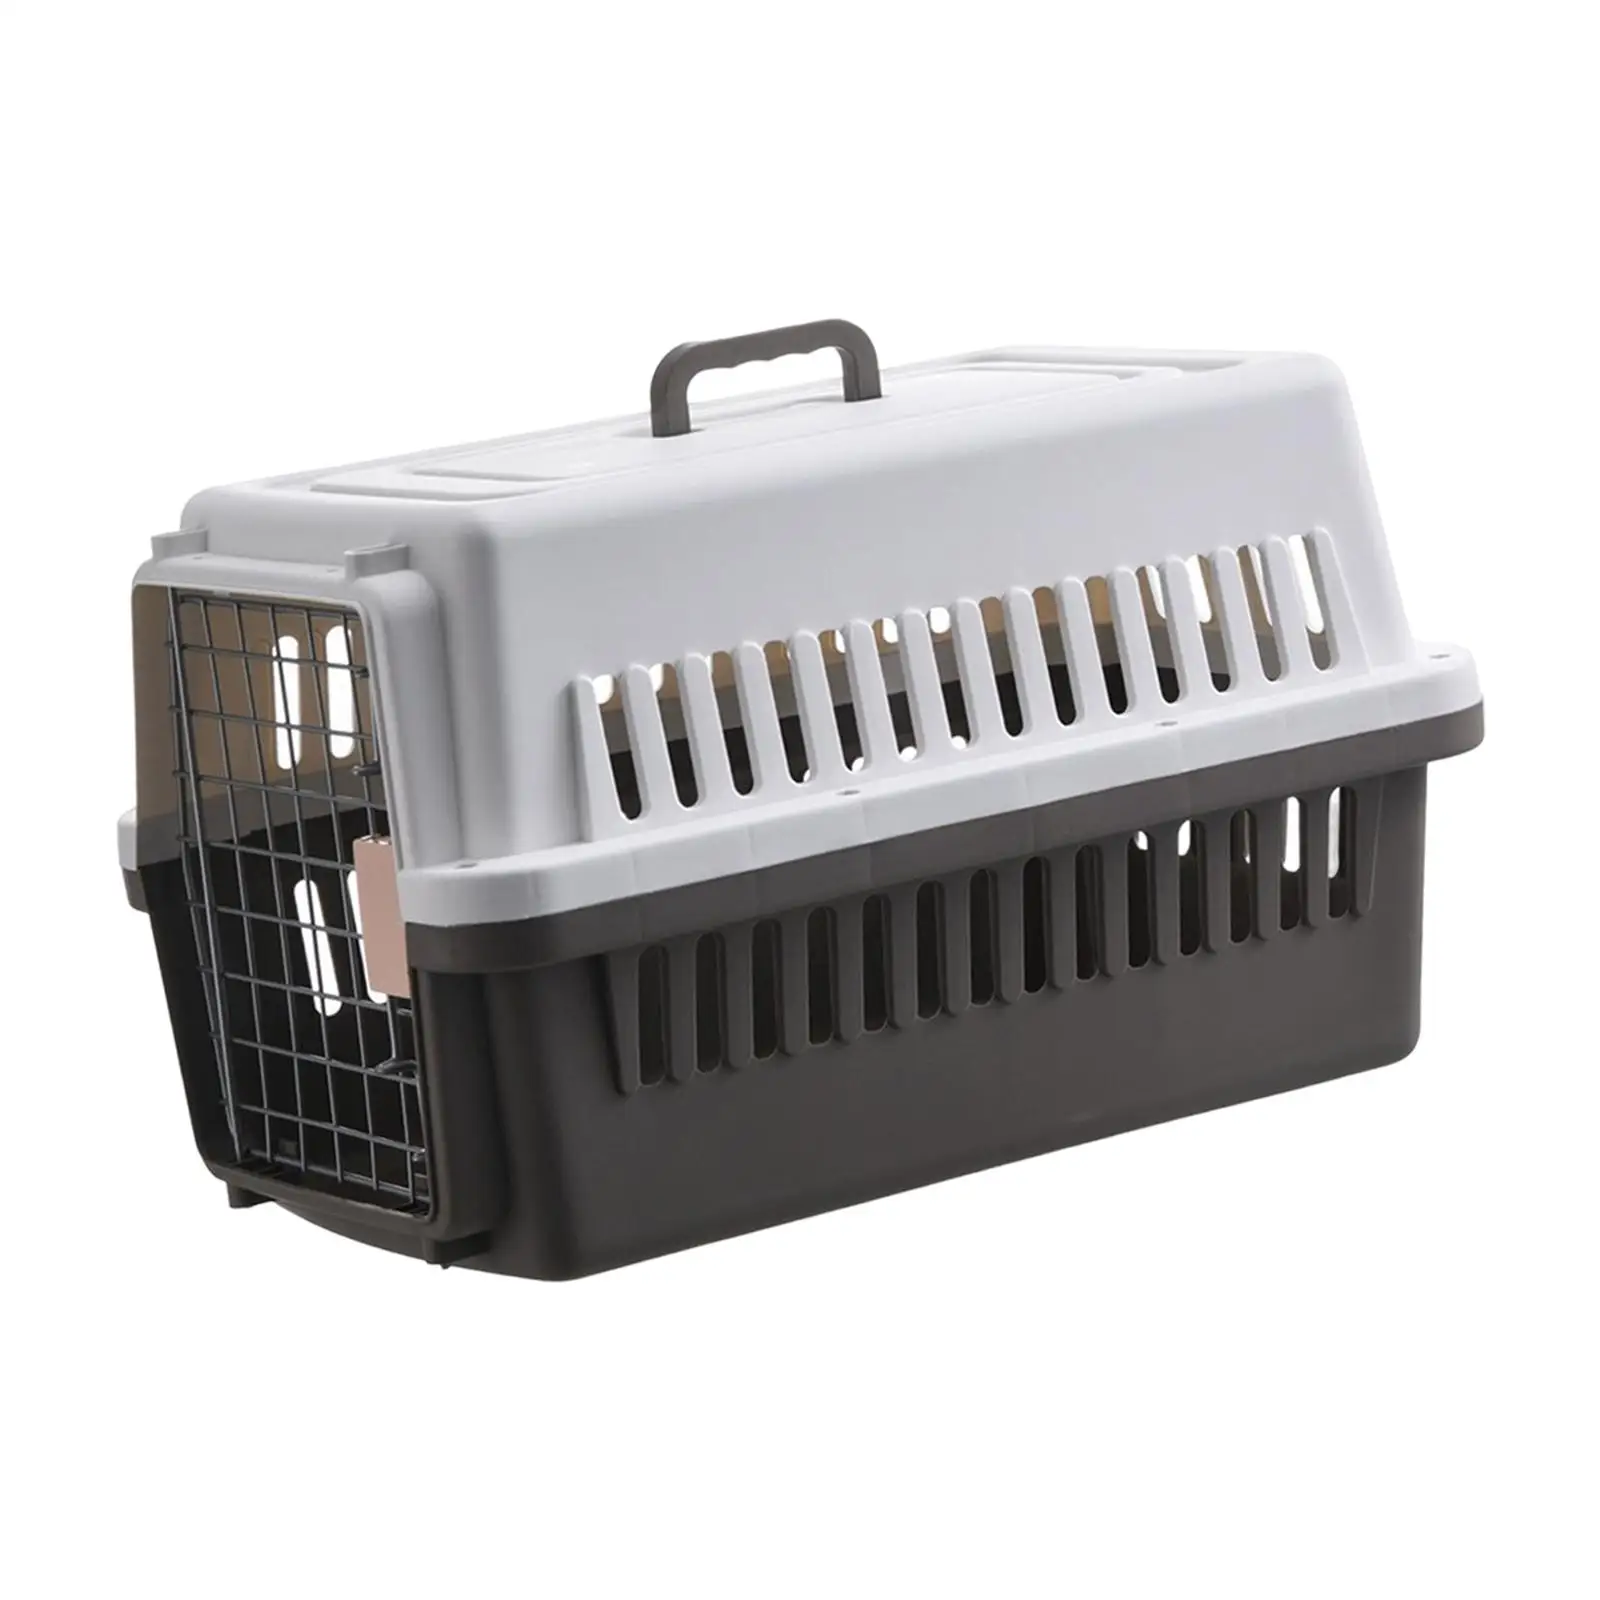 Dog Travel Kennel Cage Transport Box, Hard Sided Pet Carrier for Cats, Kitten